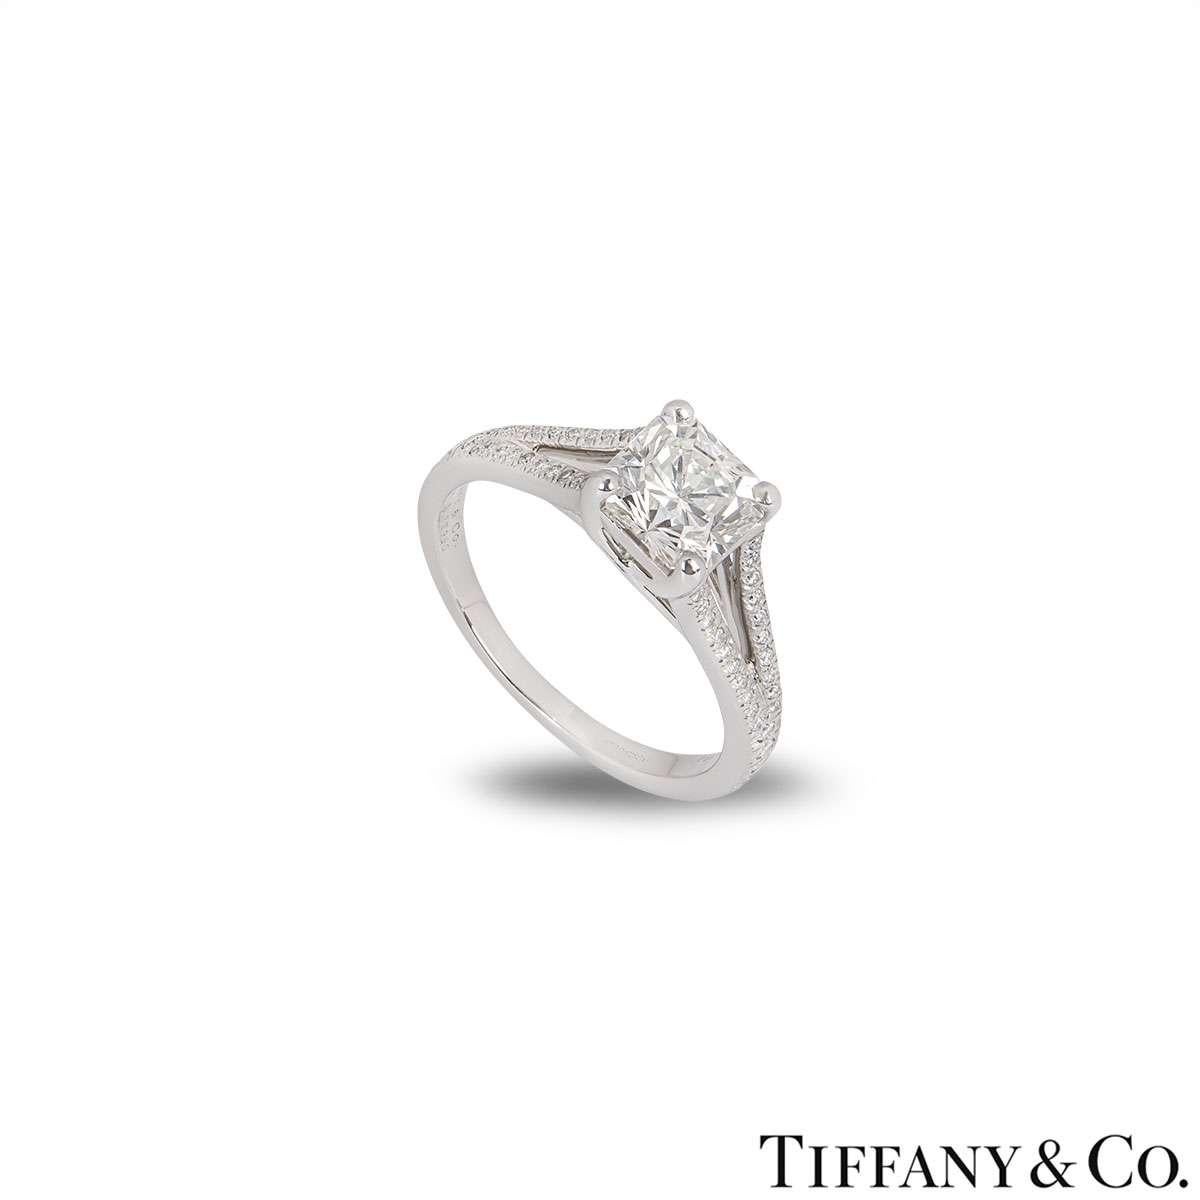 A stunning platinum diamond ring from the Lucida collection by Tiffany & Co. The ring is set to the centre with a 1.24ct Lucida cut diamond, I colour and VVS2 clarity. The ring has split shoulders, pave set with round brilliant cut diamonds